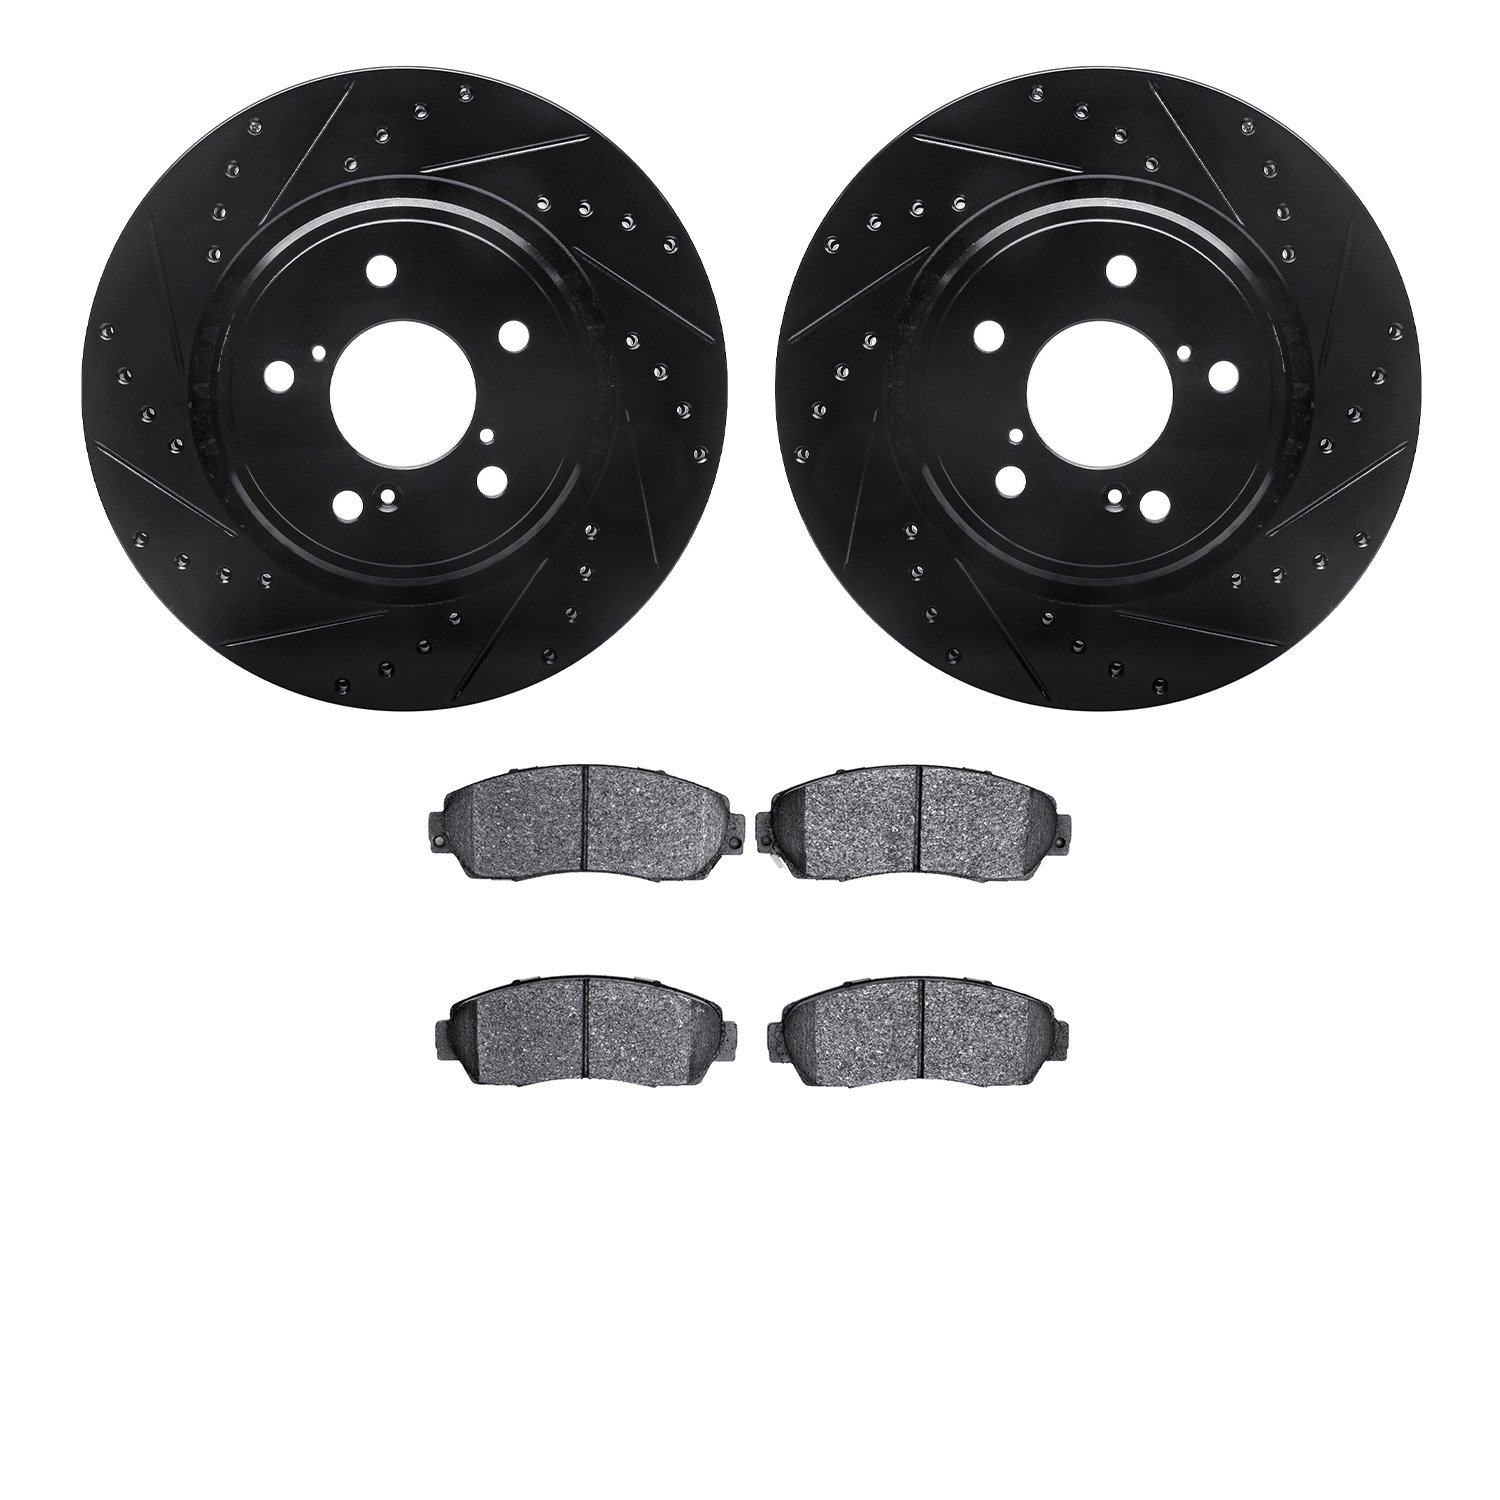 8302-59087 Drilled/Slotted Brake Rotors with 3000-Series Ceramic Brake Pads Kit [Black], Fits Select Acura/Honda, Position: Fron